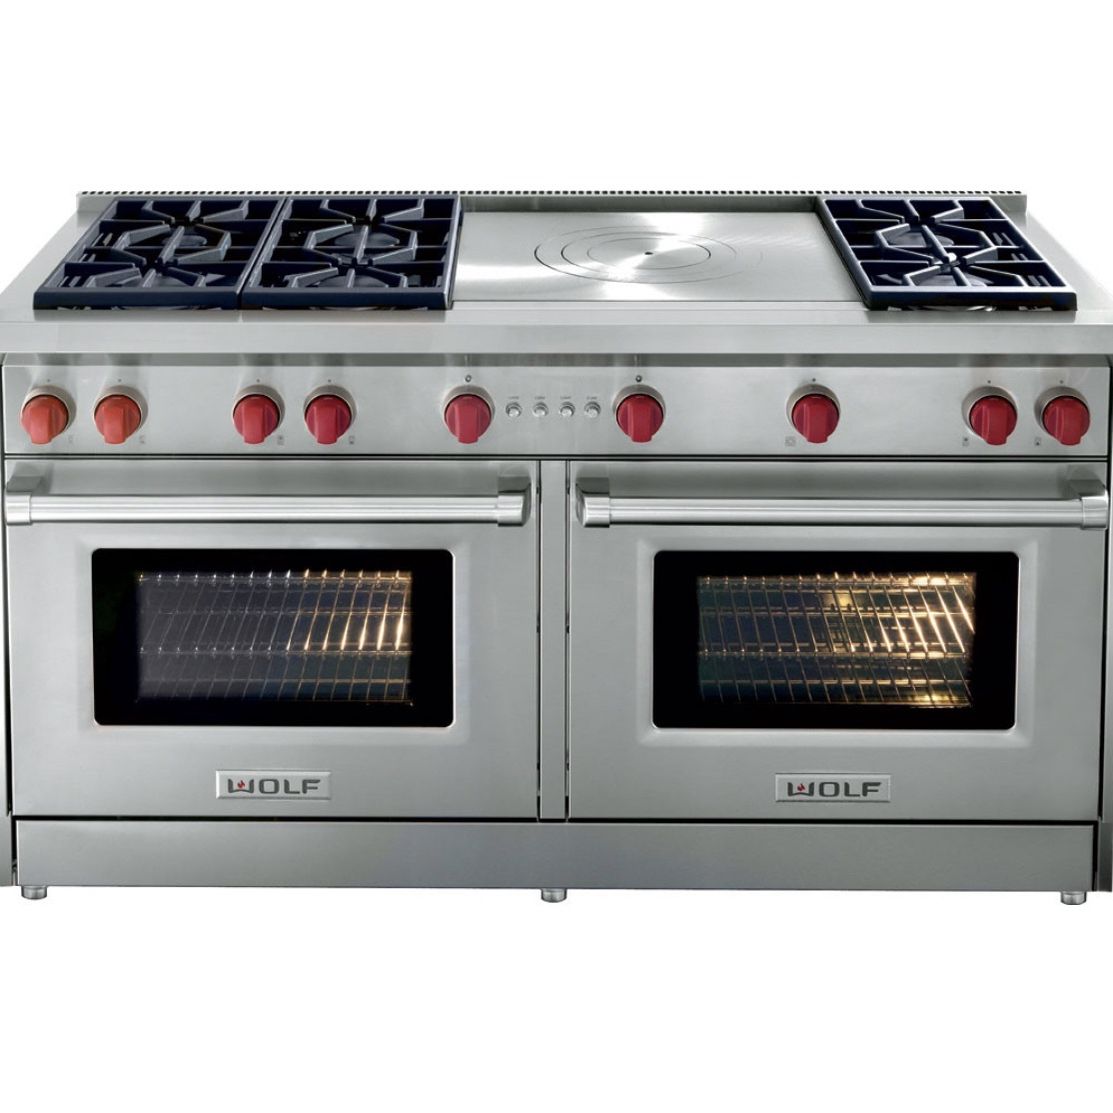 Wolf 60” Gas Range Brand new In Package 